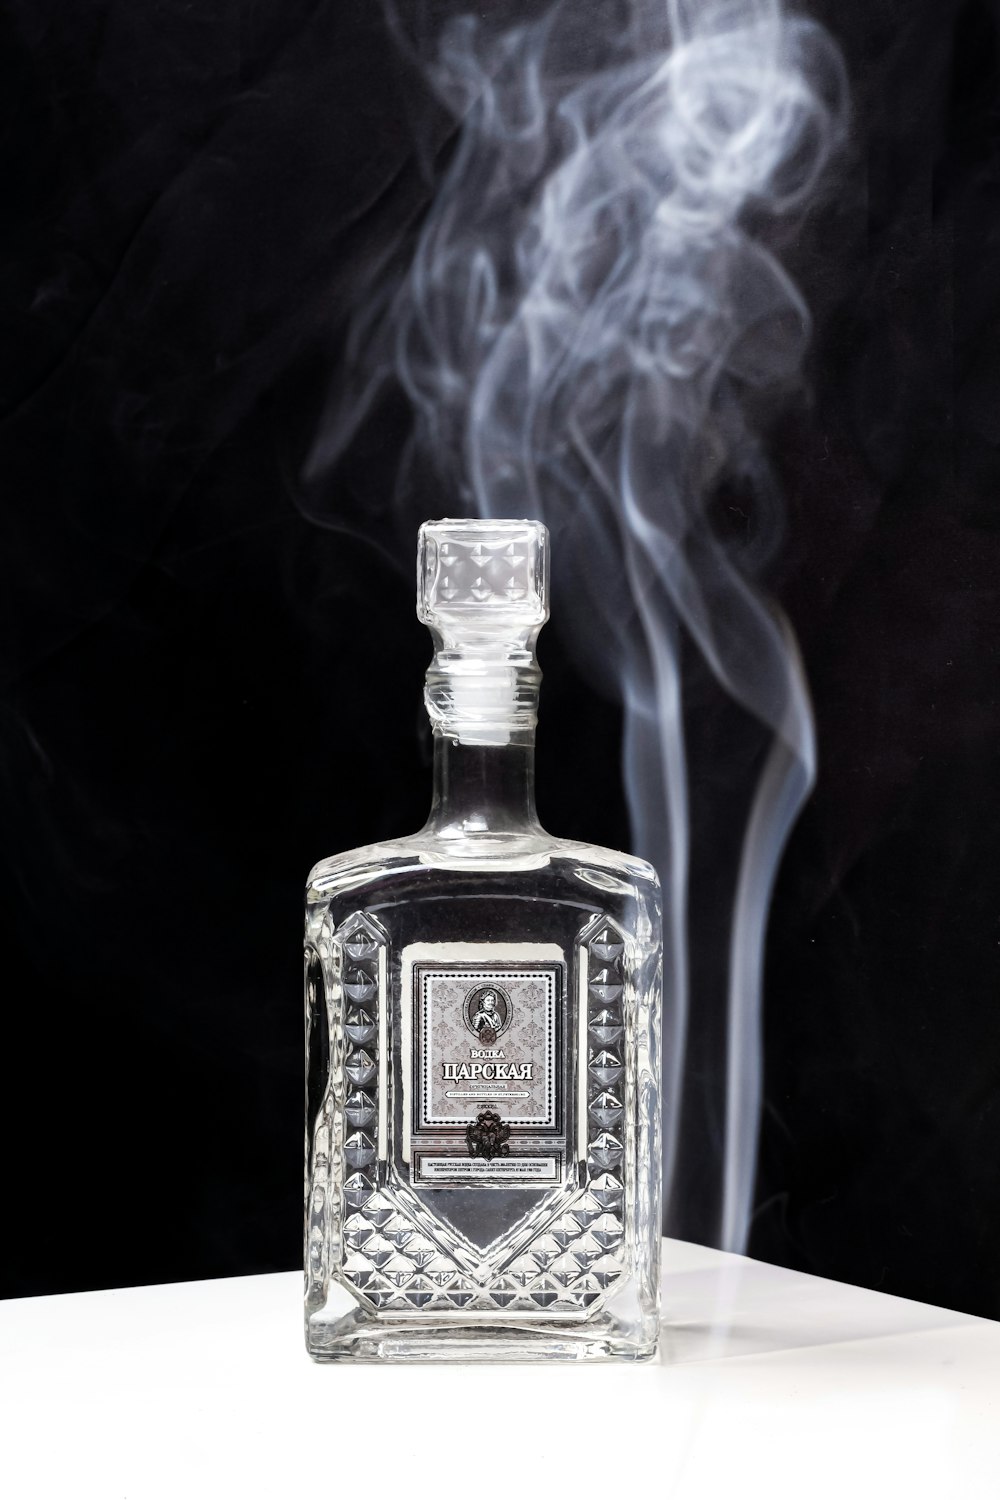 a bottle of liquor with smoke coming out of it